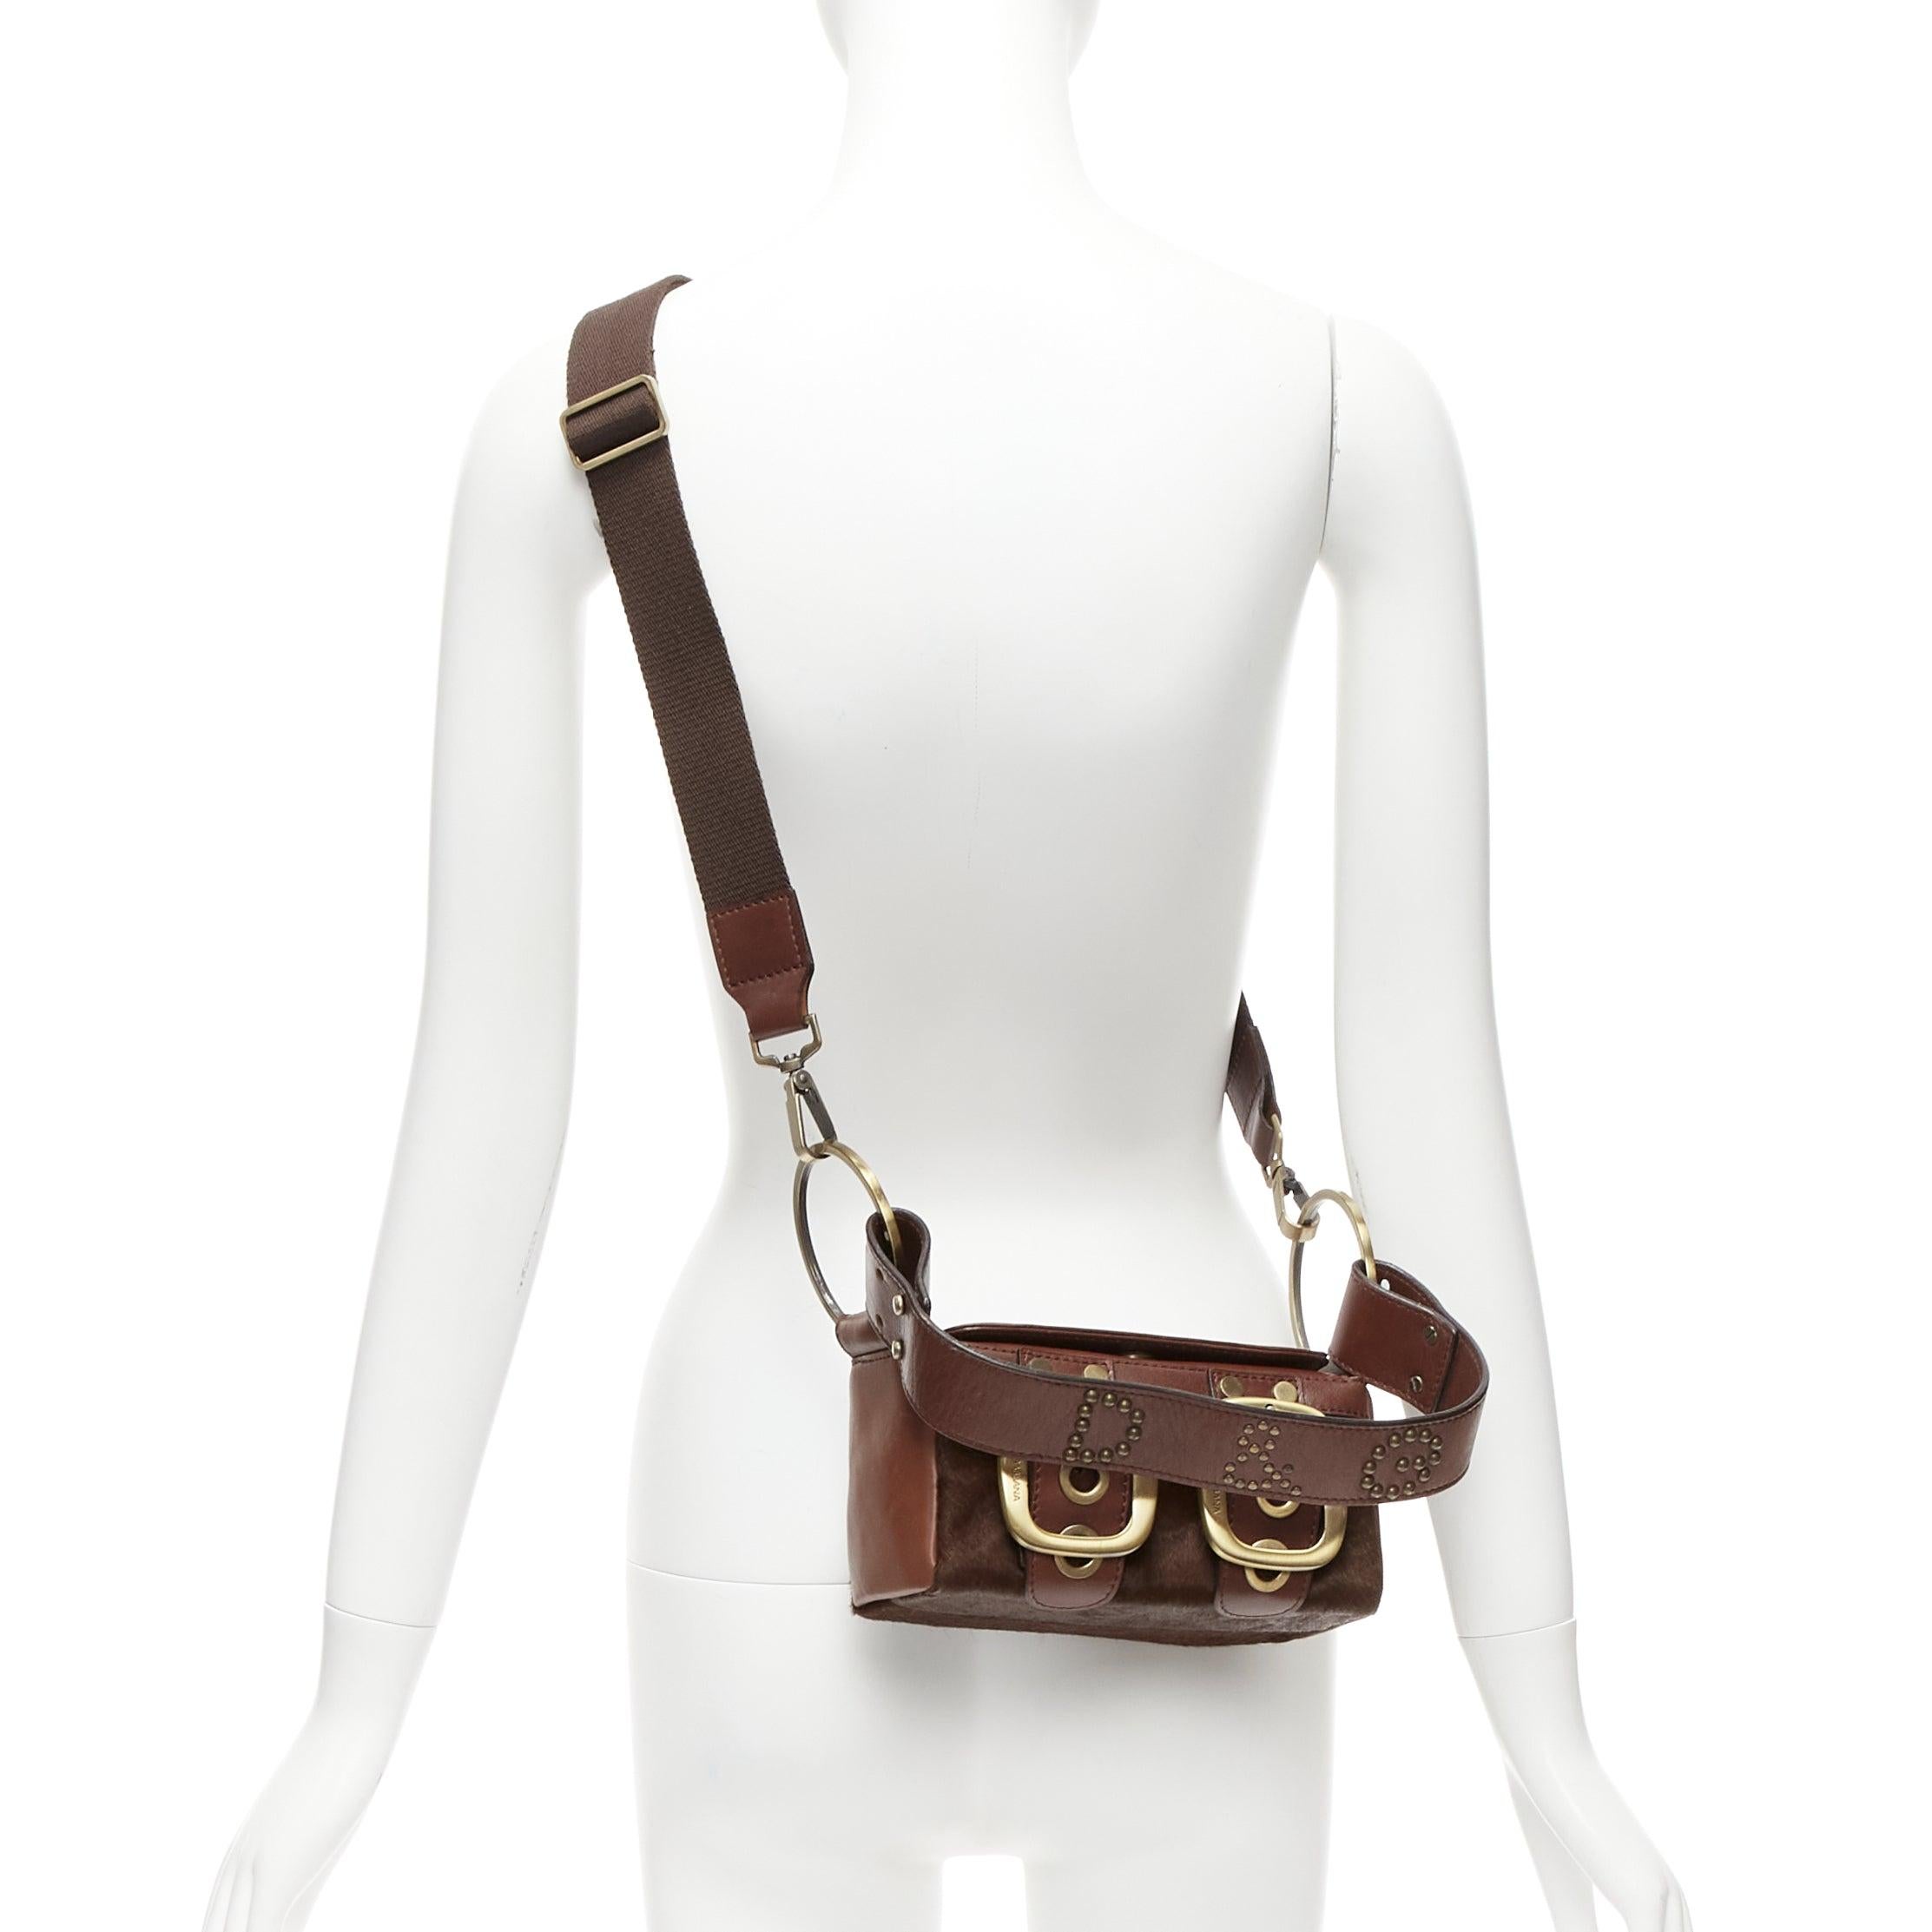 DOLCE GABBANA Vintage Y2K brown calfskin leather bronze buckle boxy shoulder bag
Reference: TGAS/D00970
Brand: Dolce Gabbana
Designer: Domenico Dolce and Stefano Gabbana
Material: Pony Hair, Leather, Metal
Color: Brown
Pattern: Animal Print
Closure: